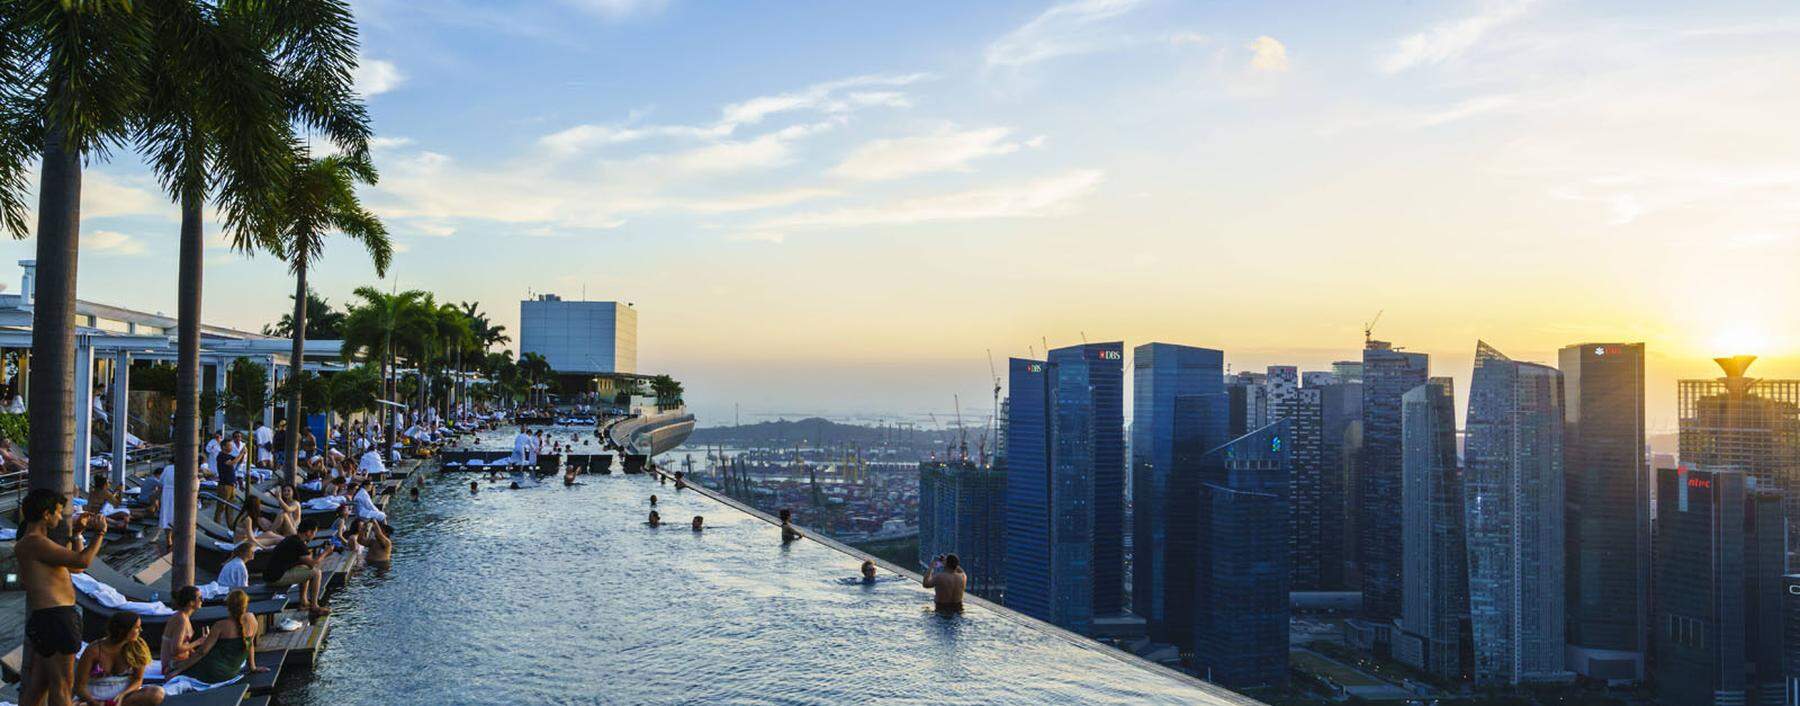 Infinity pool on the roof of the Marina Bay Sands Hotel with spectacular views over the Singapore sk